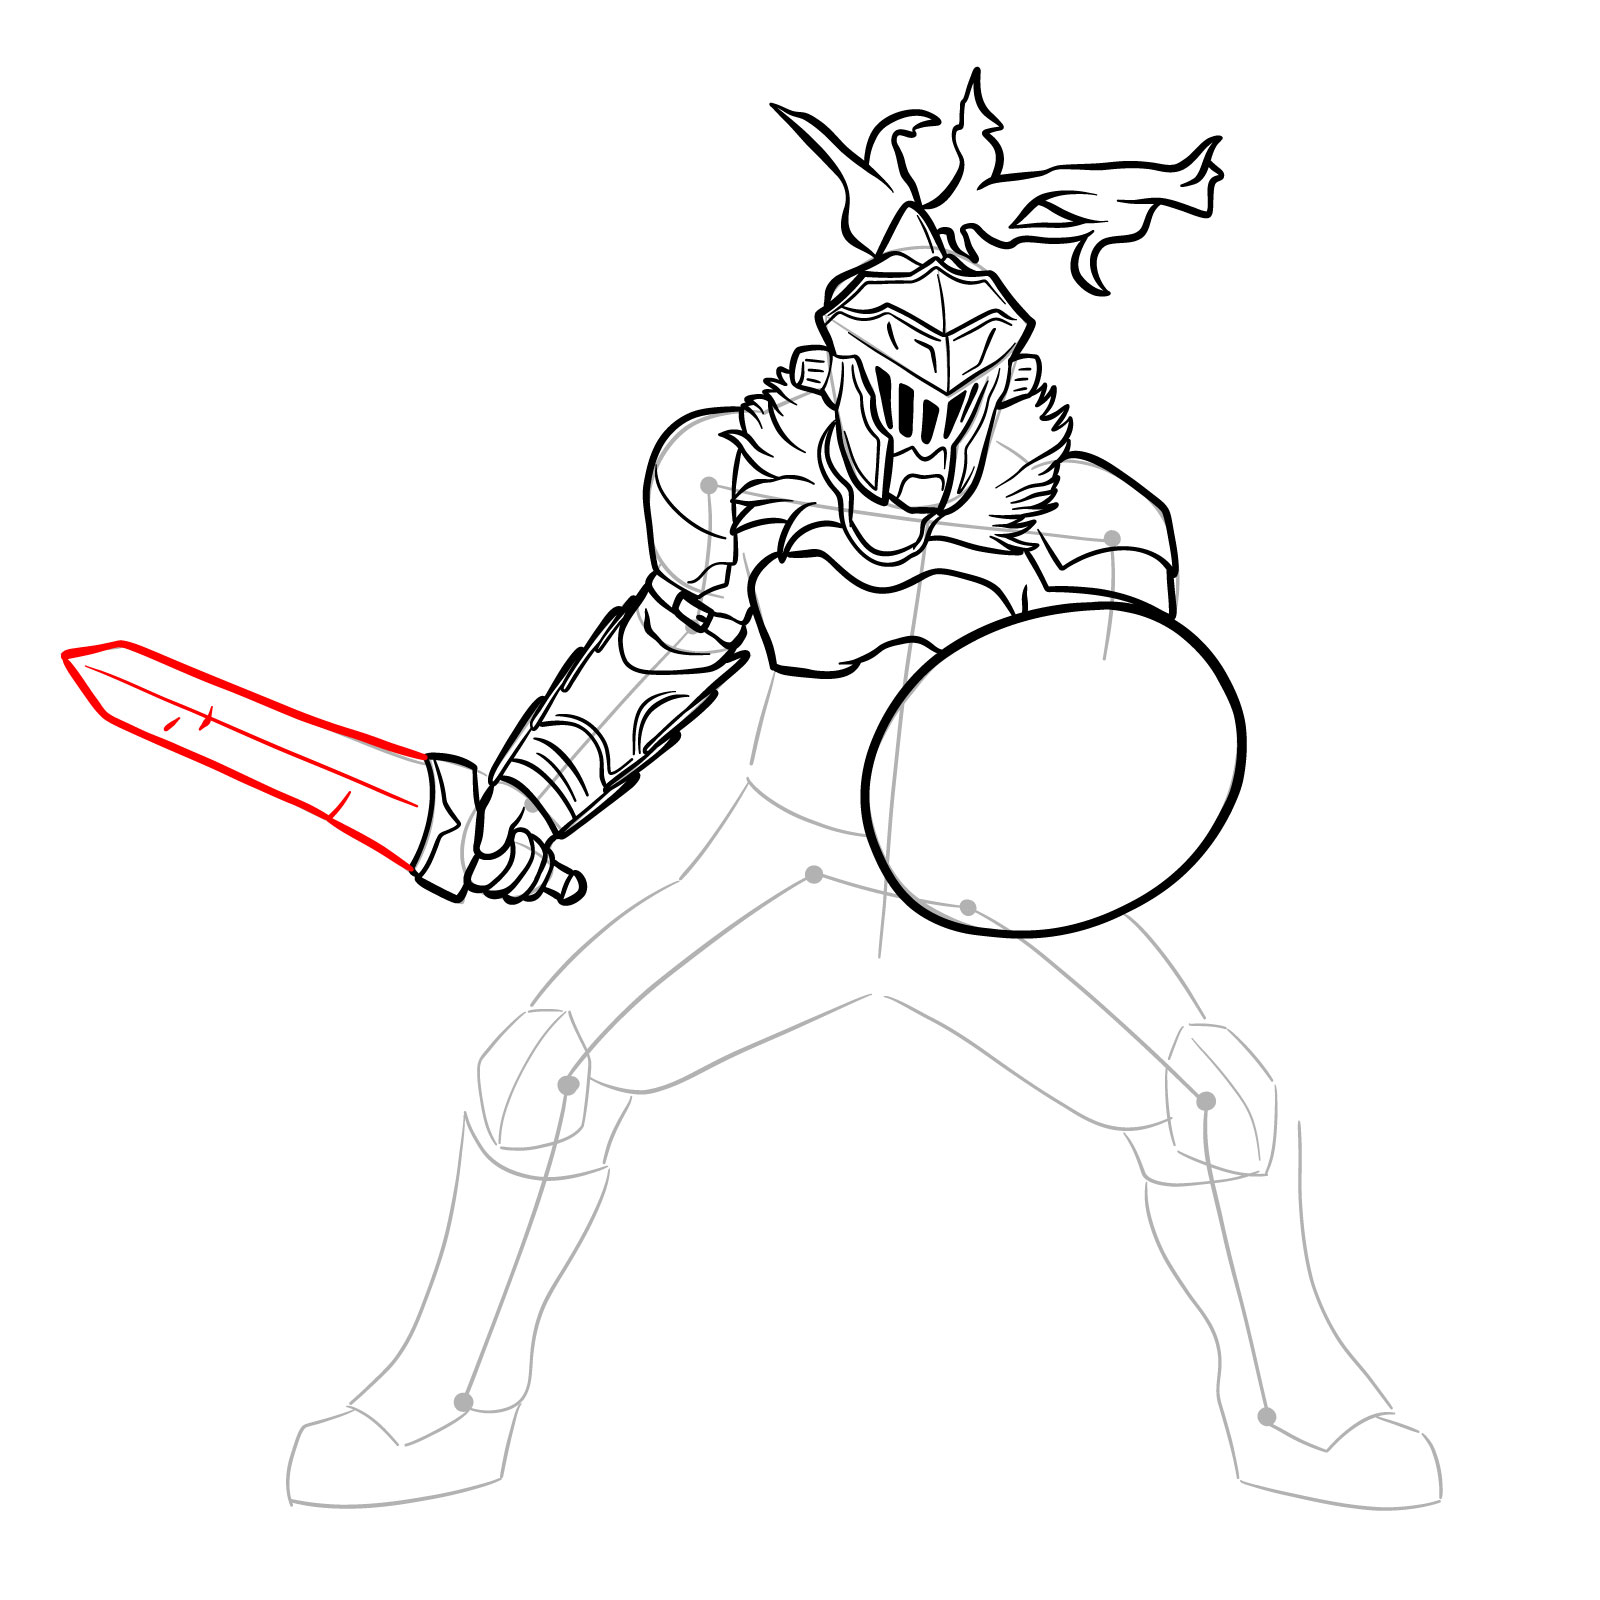 How to Draw Goblin Slayer in battle stance - step 23